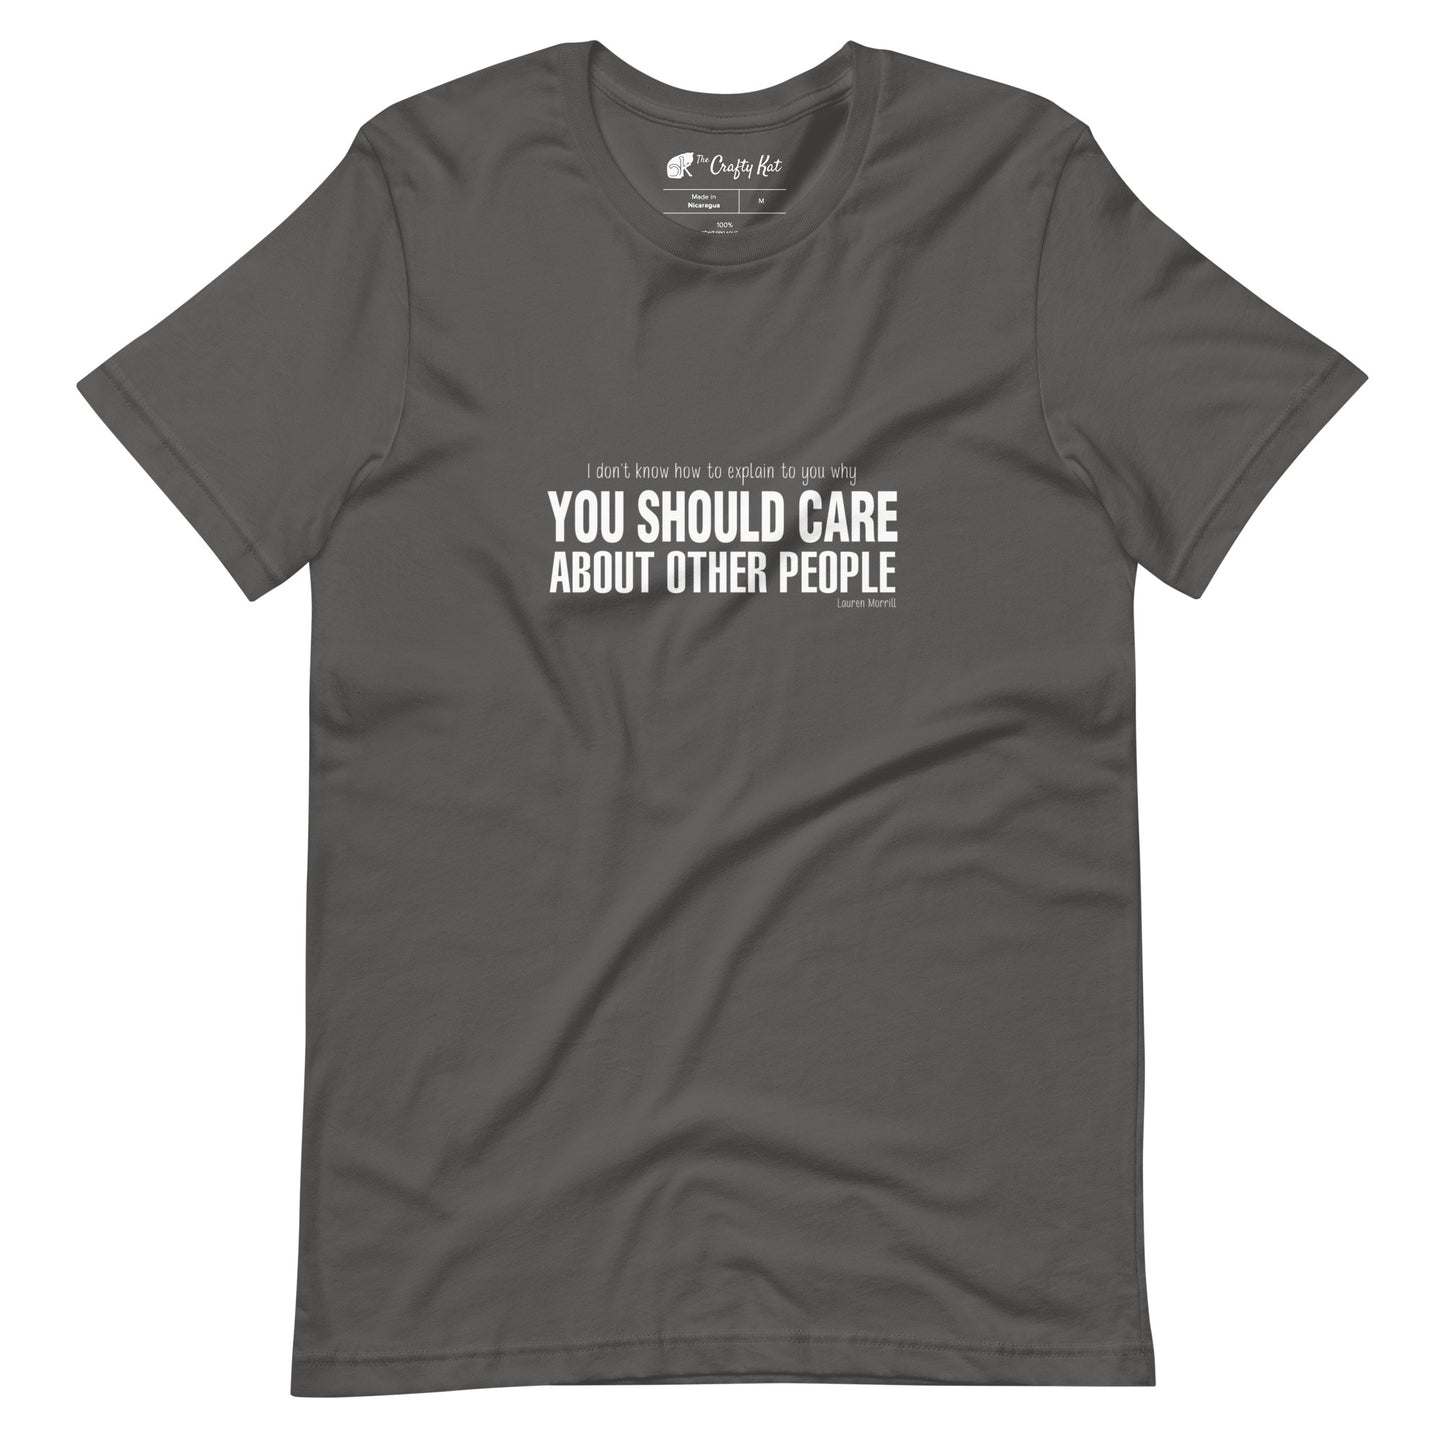 Asphalt grey t-shirt with quote by Lauren Morrill: "I don't know how to explain to you why YOU SHOULD CARE ABOUT OTHER PEOPLE"